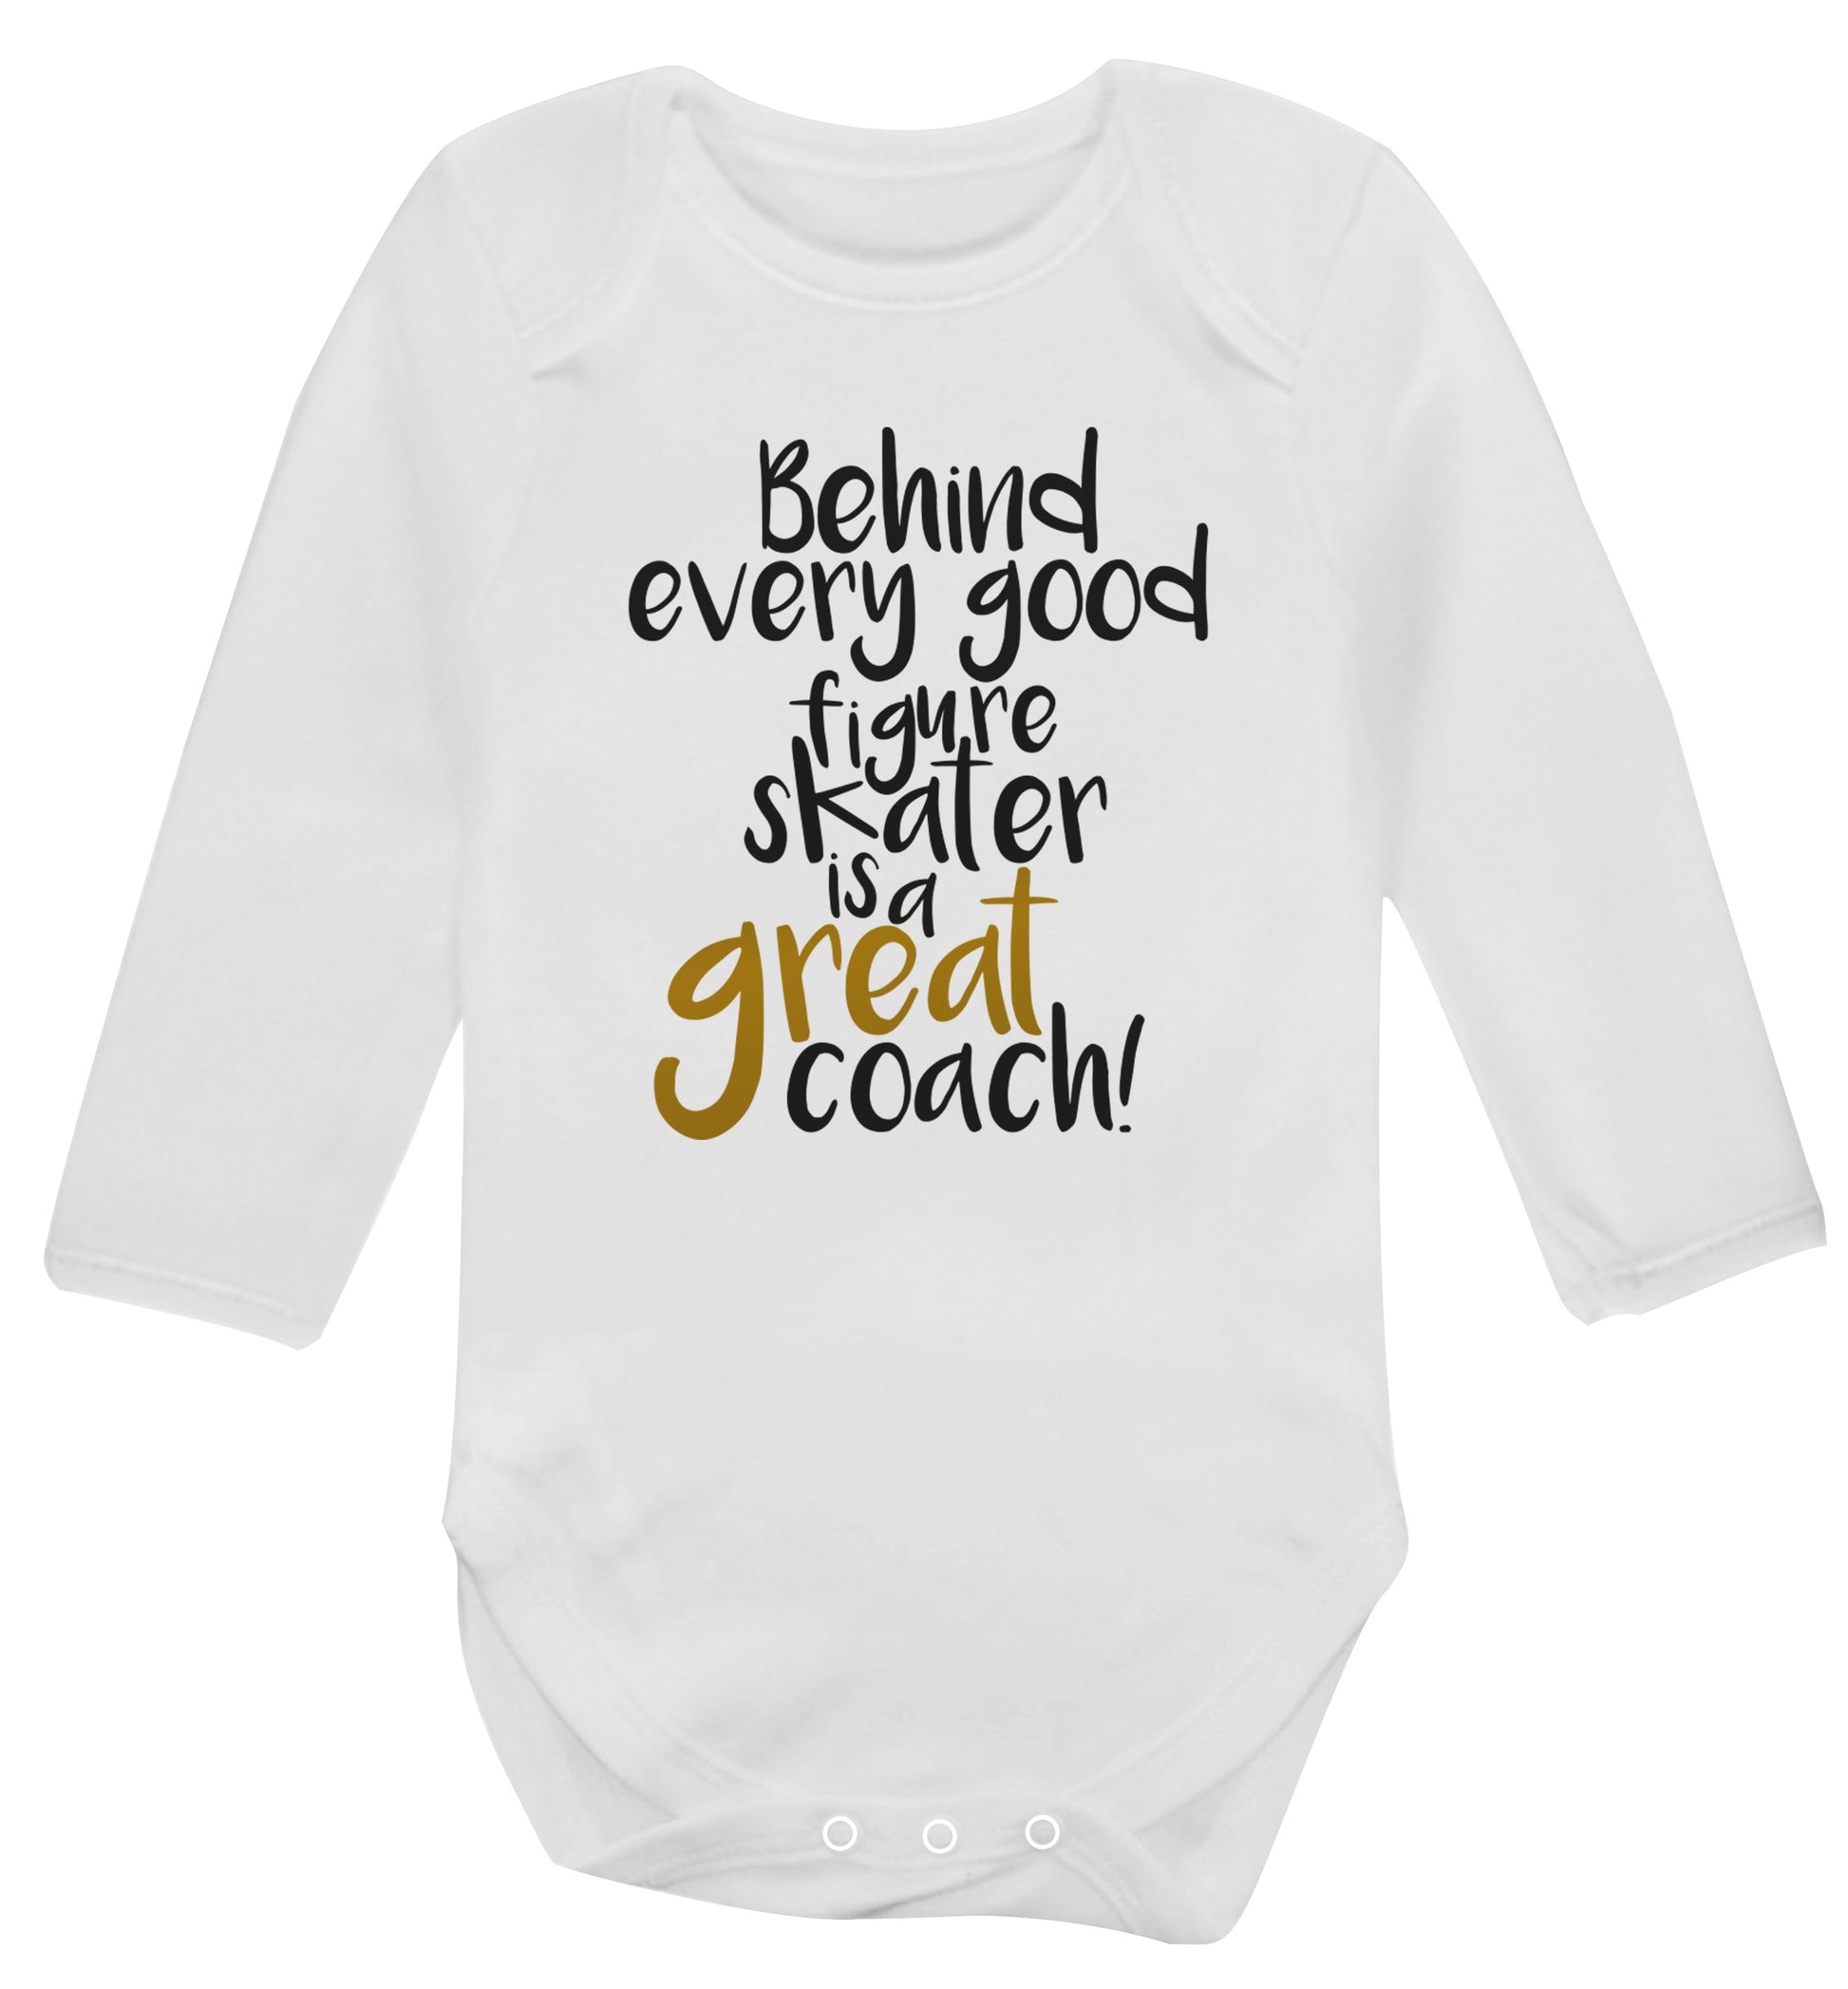 Behind every good figure skater is a great coach Baby Vest long sleeved white 6-12 months